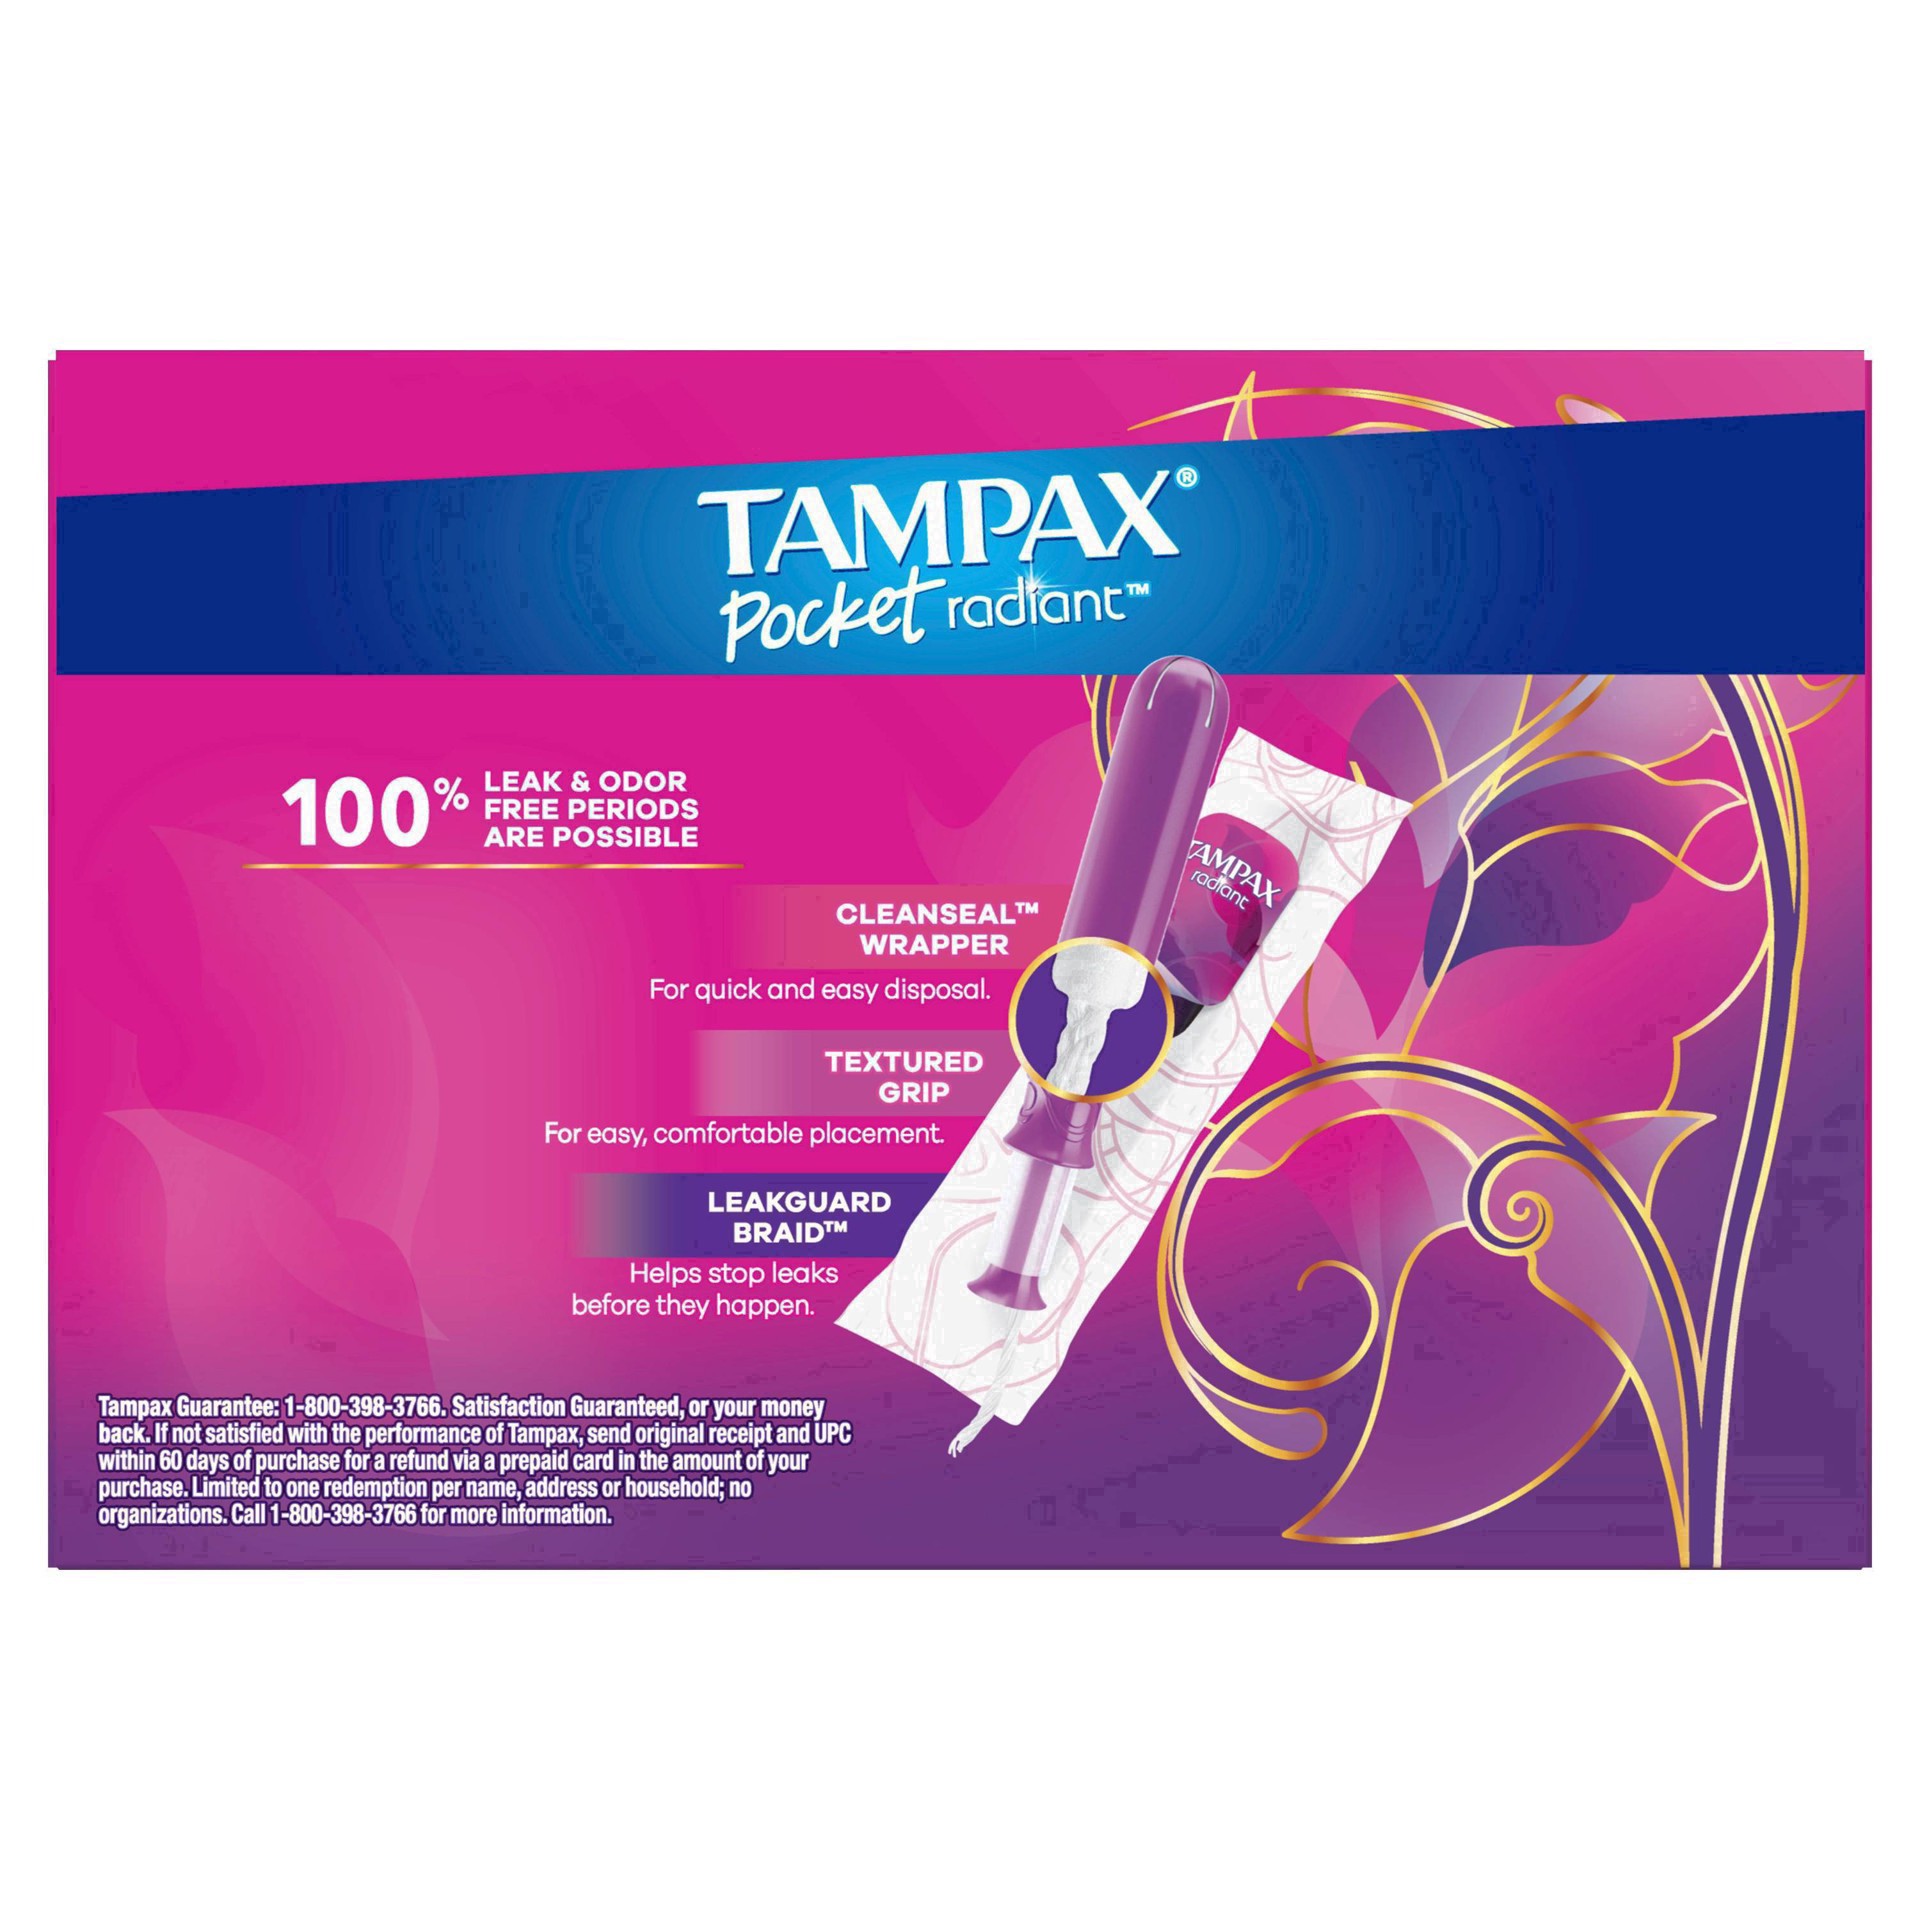 slide 35 of 94, Tampax Pocket Radiant Compact Plastic Tampons, With LeakGuard Braid, Super Absorbency, Unscented, 28 Count, 28 ct